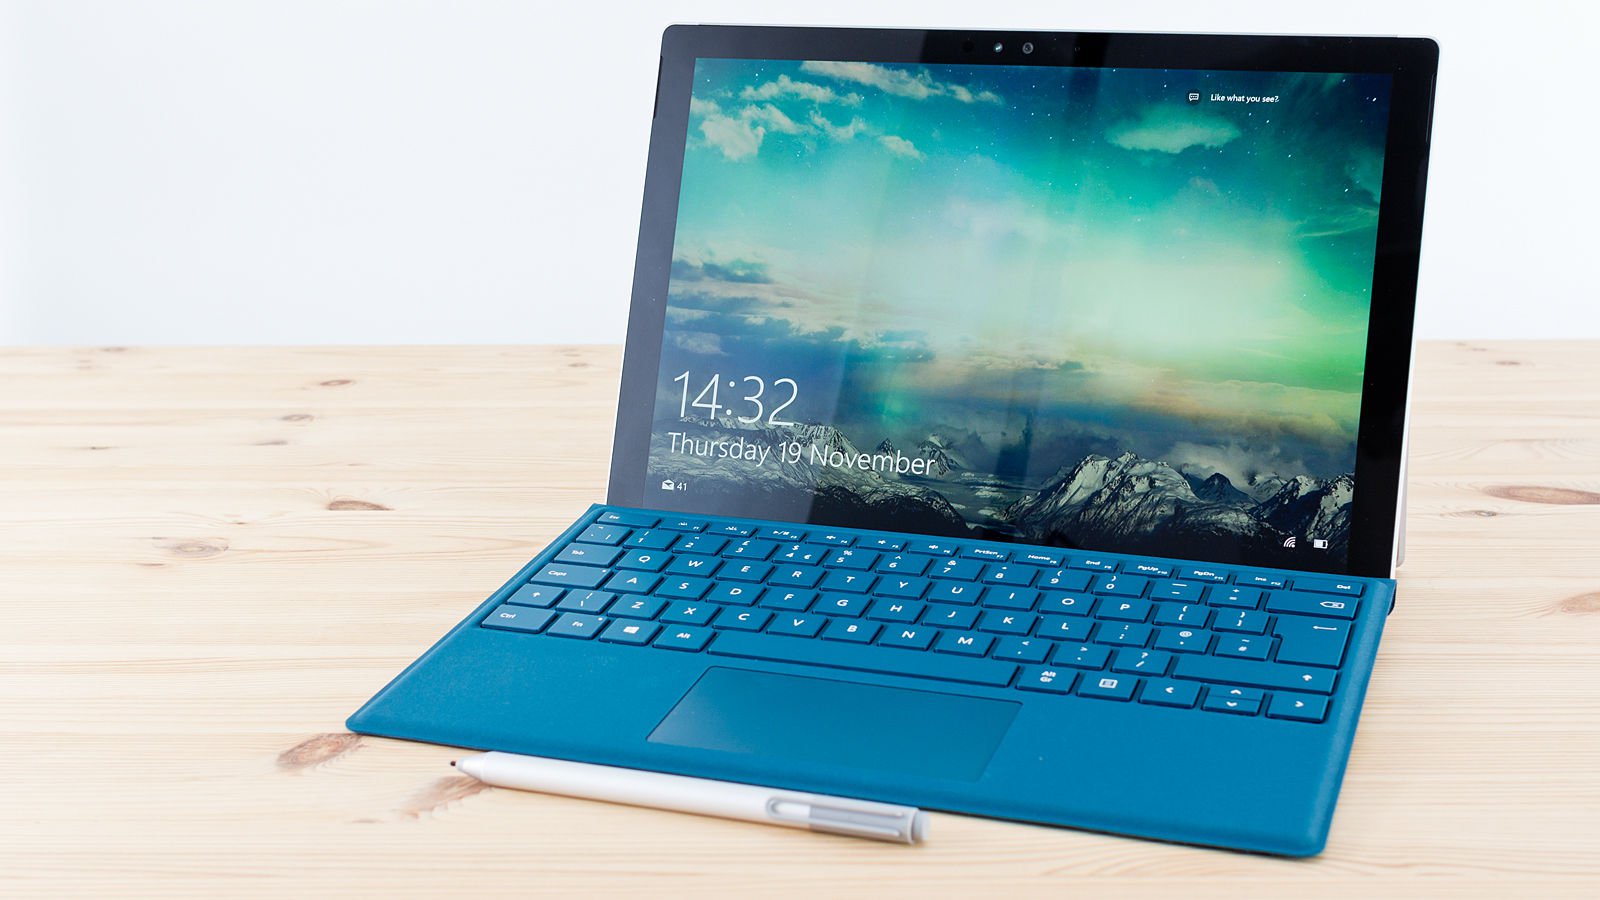 Microsoft Surface Pro 5 Will Reportedly Launch in March With 4K Display